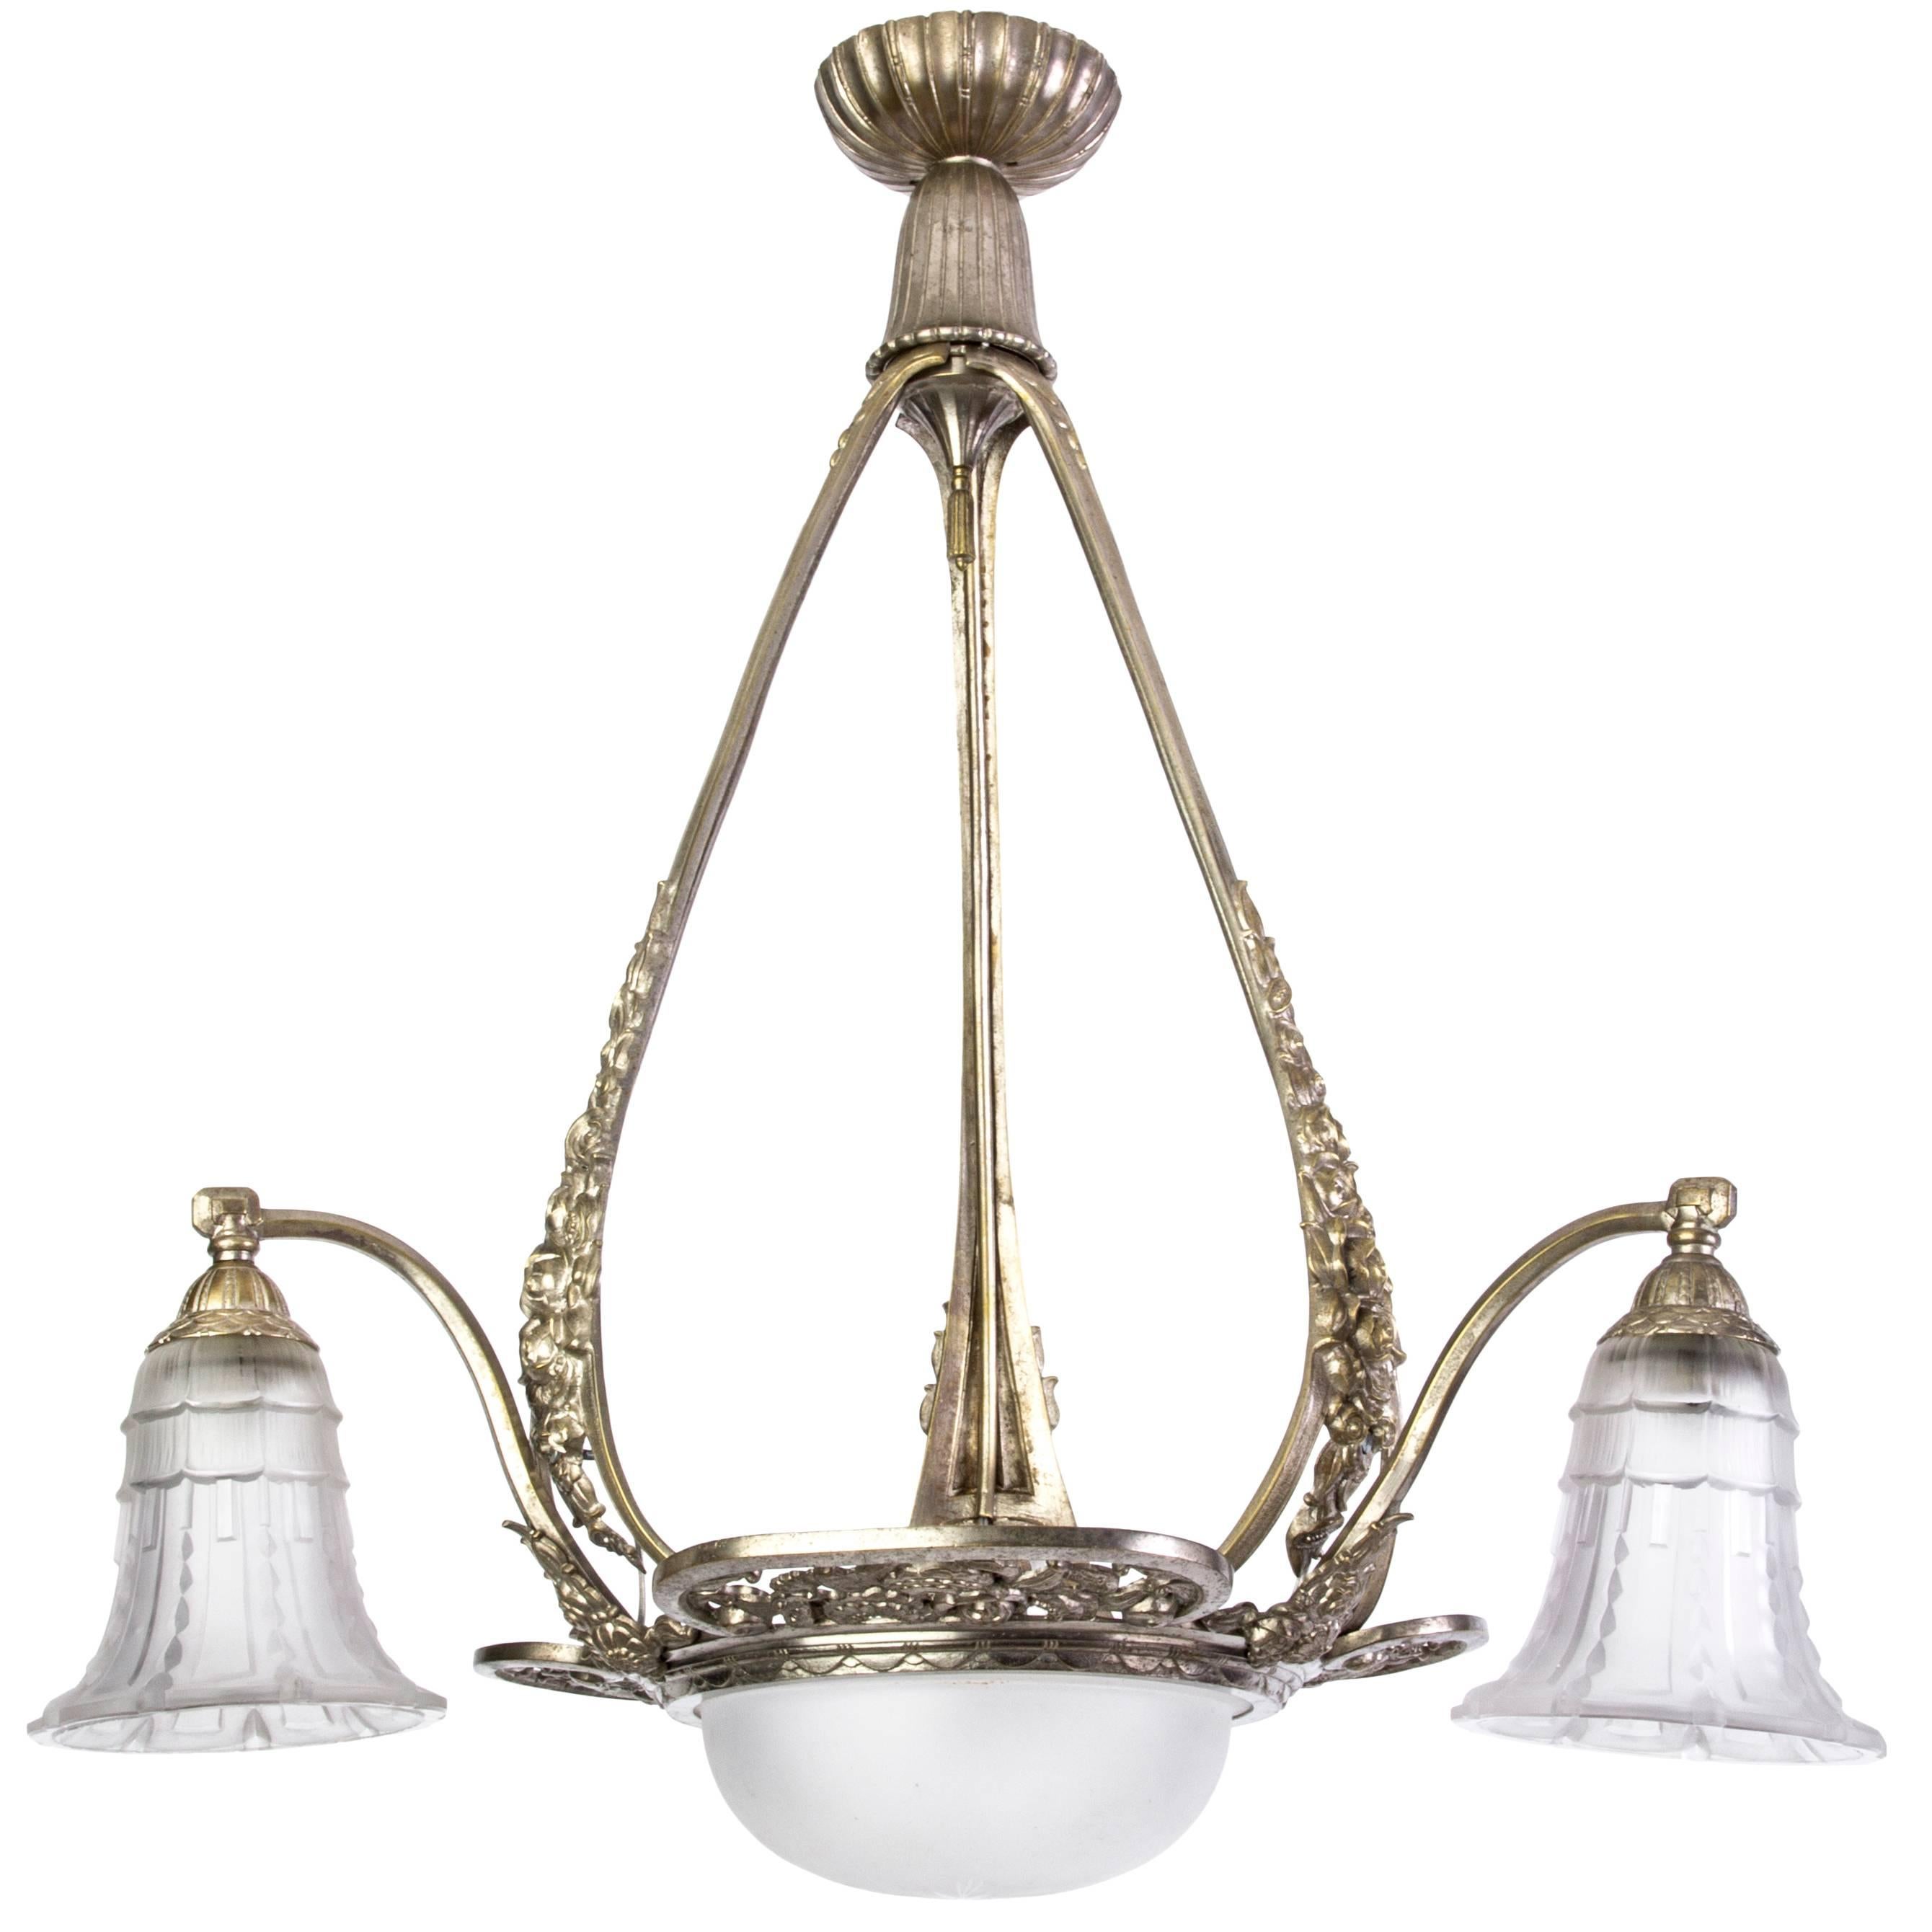 Stunning Early French Art Deco Chandelier For Sale